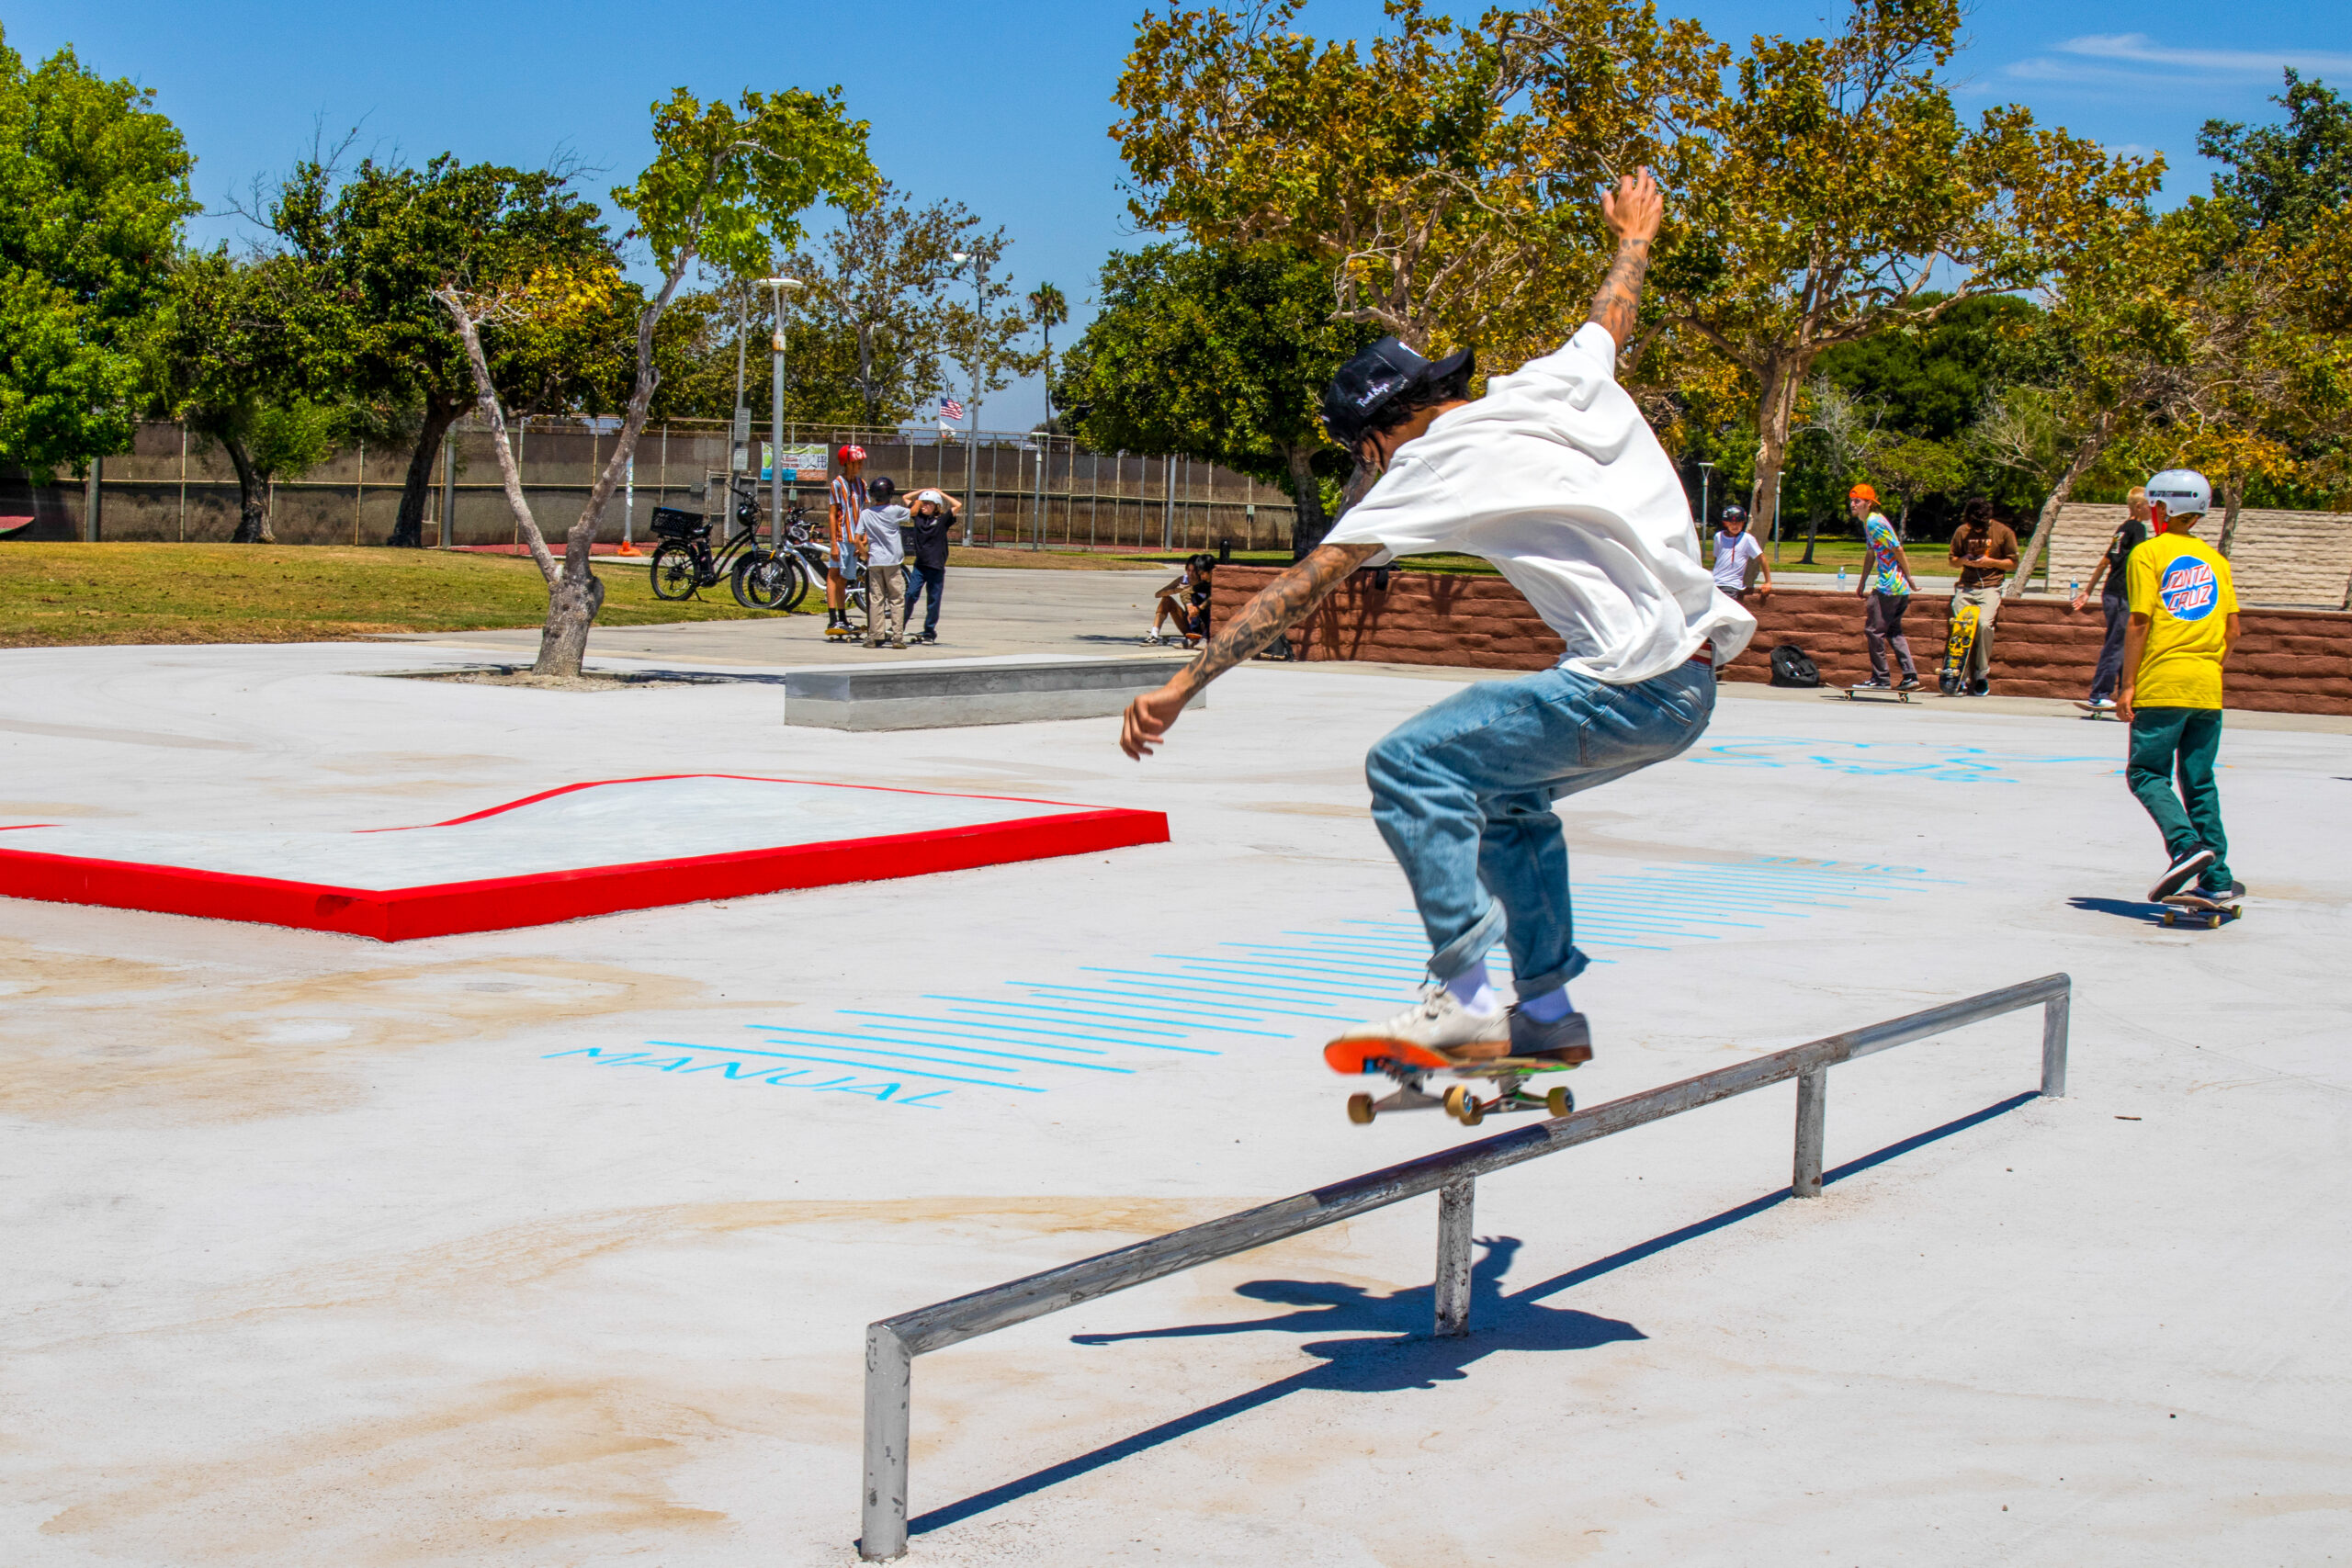 Featured image for “Edison Skate Spot”